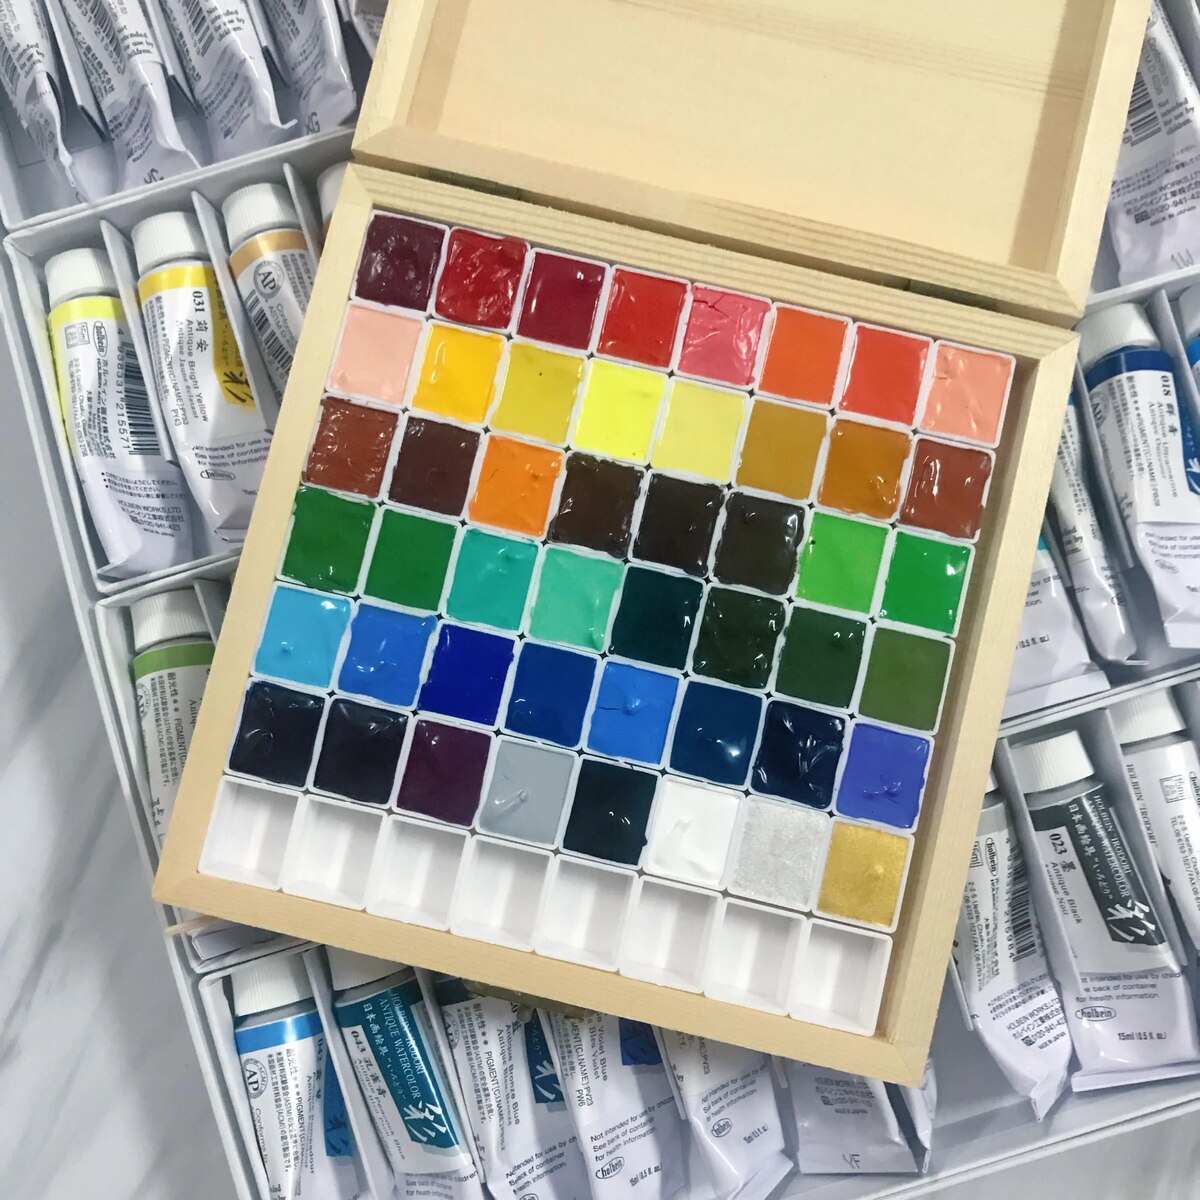 48-color Watercolor Paint, Washable Watercolor Paint Set, Non-toxic Watercolor  Paint Set, Suitable For Children, Adults, Beginners